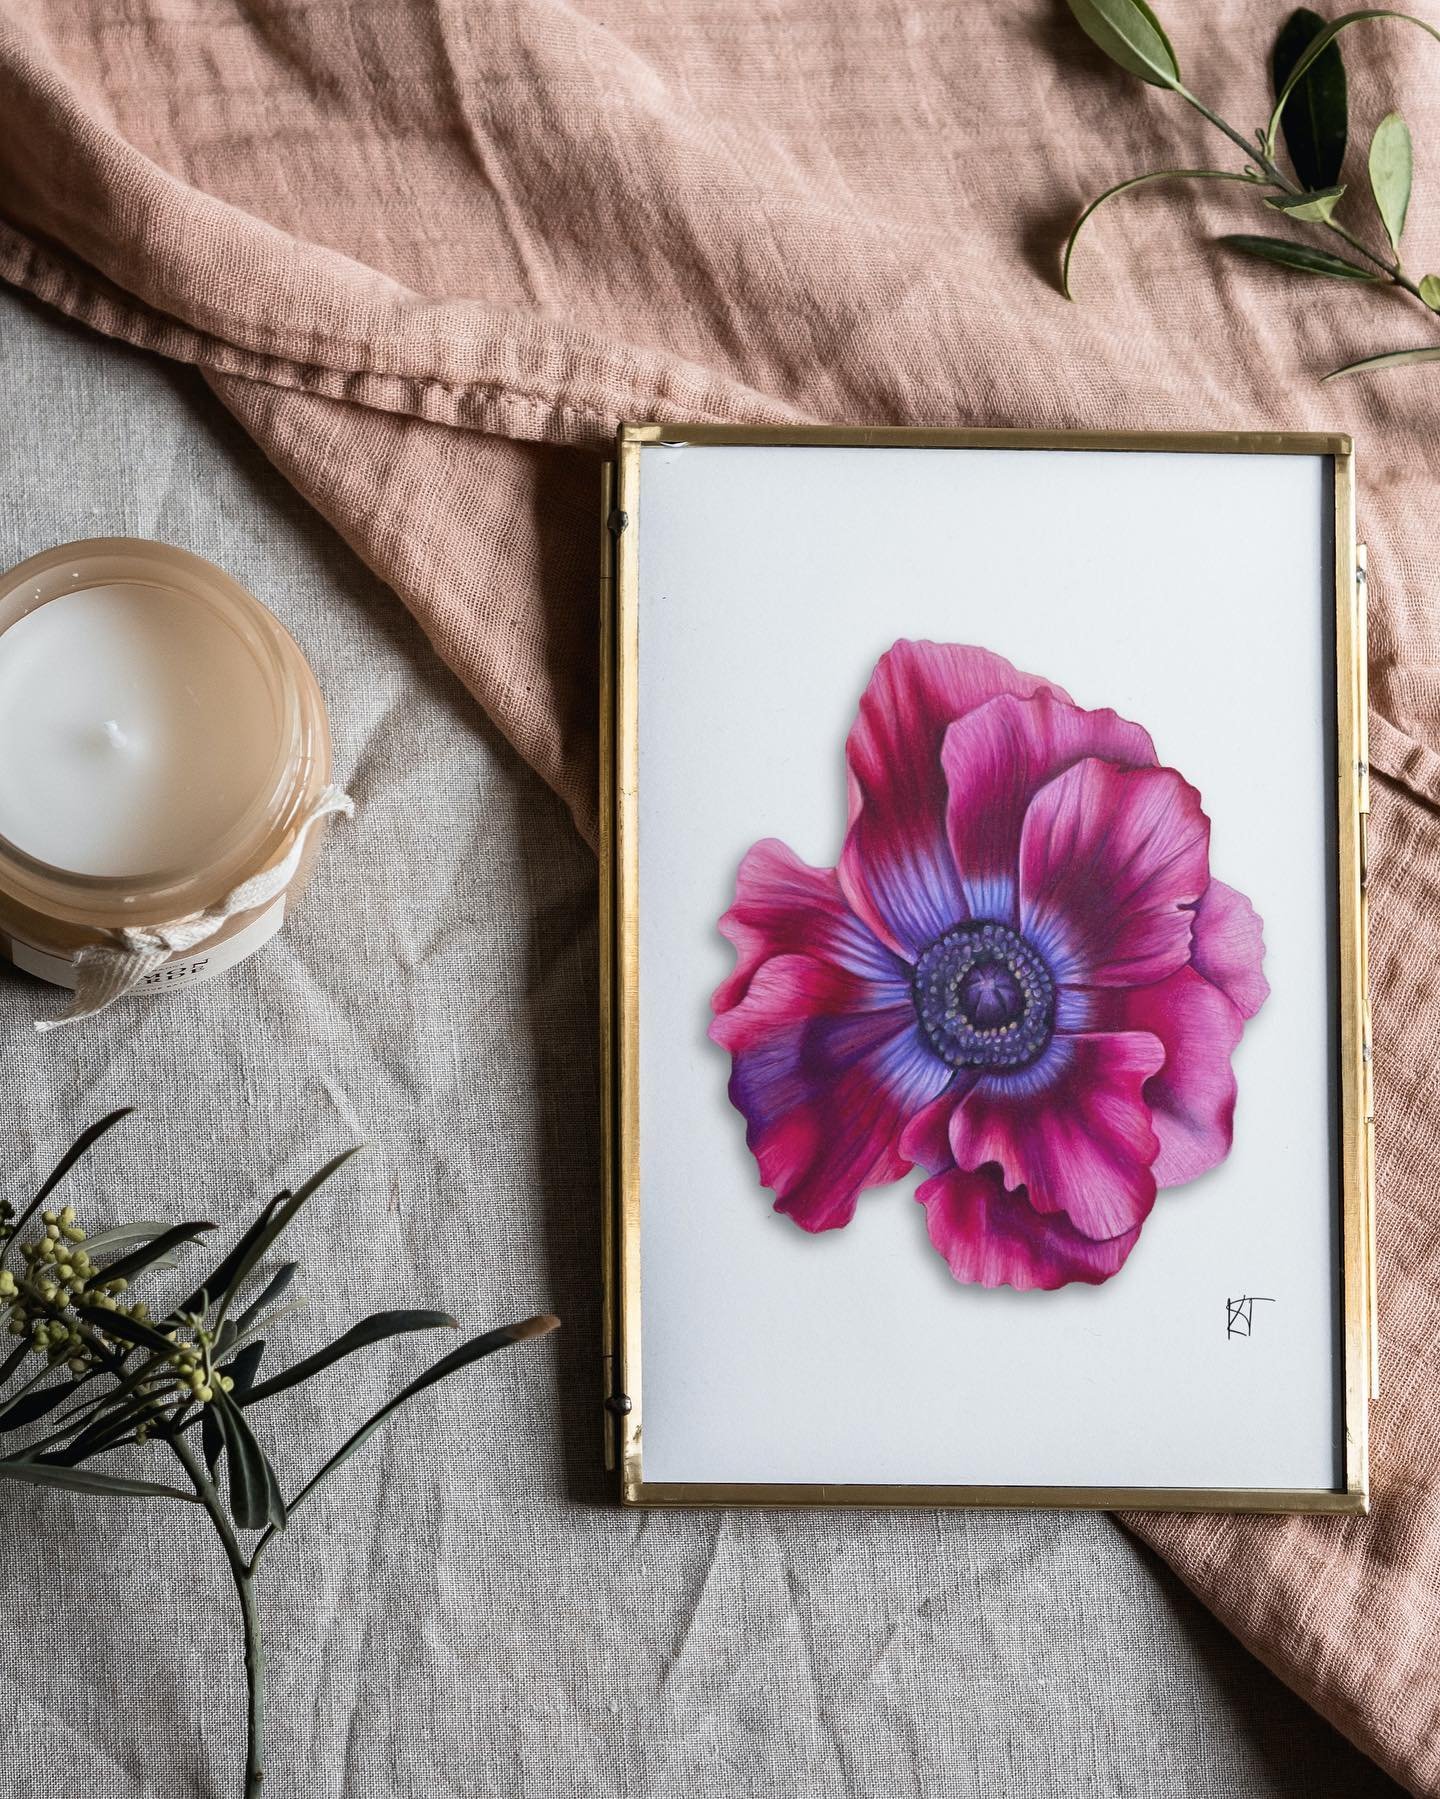 A collaborative website drop with the amazing @savkaclay who I went to high school with (whaa!) We have reconnected and decided to sell some art that was inspired by each other&rsquo;s work. 
*
This is an Anemone flower 🌸
In this webshop drop, print